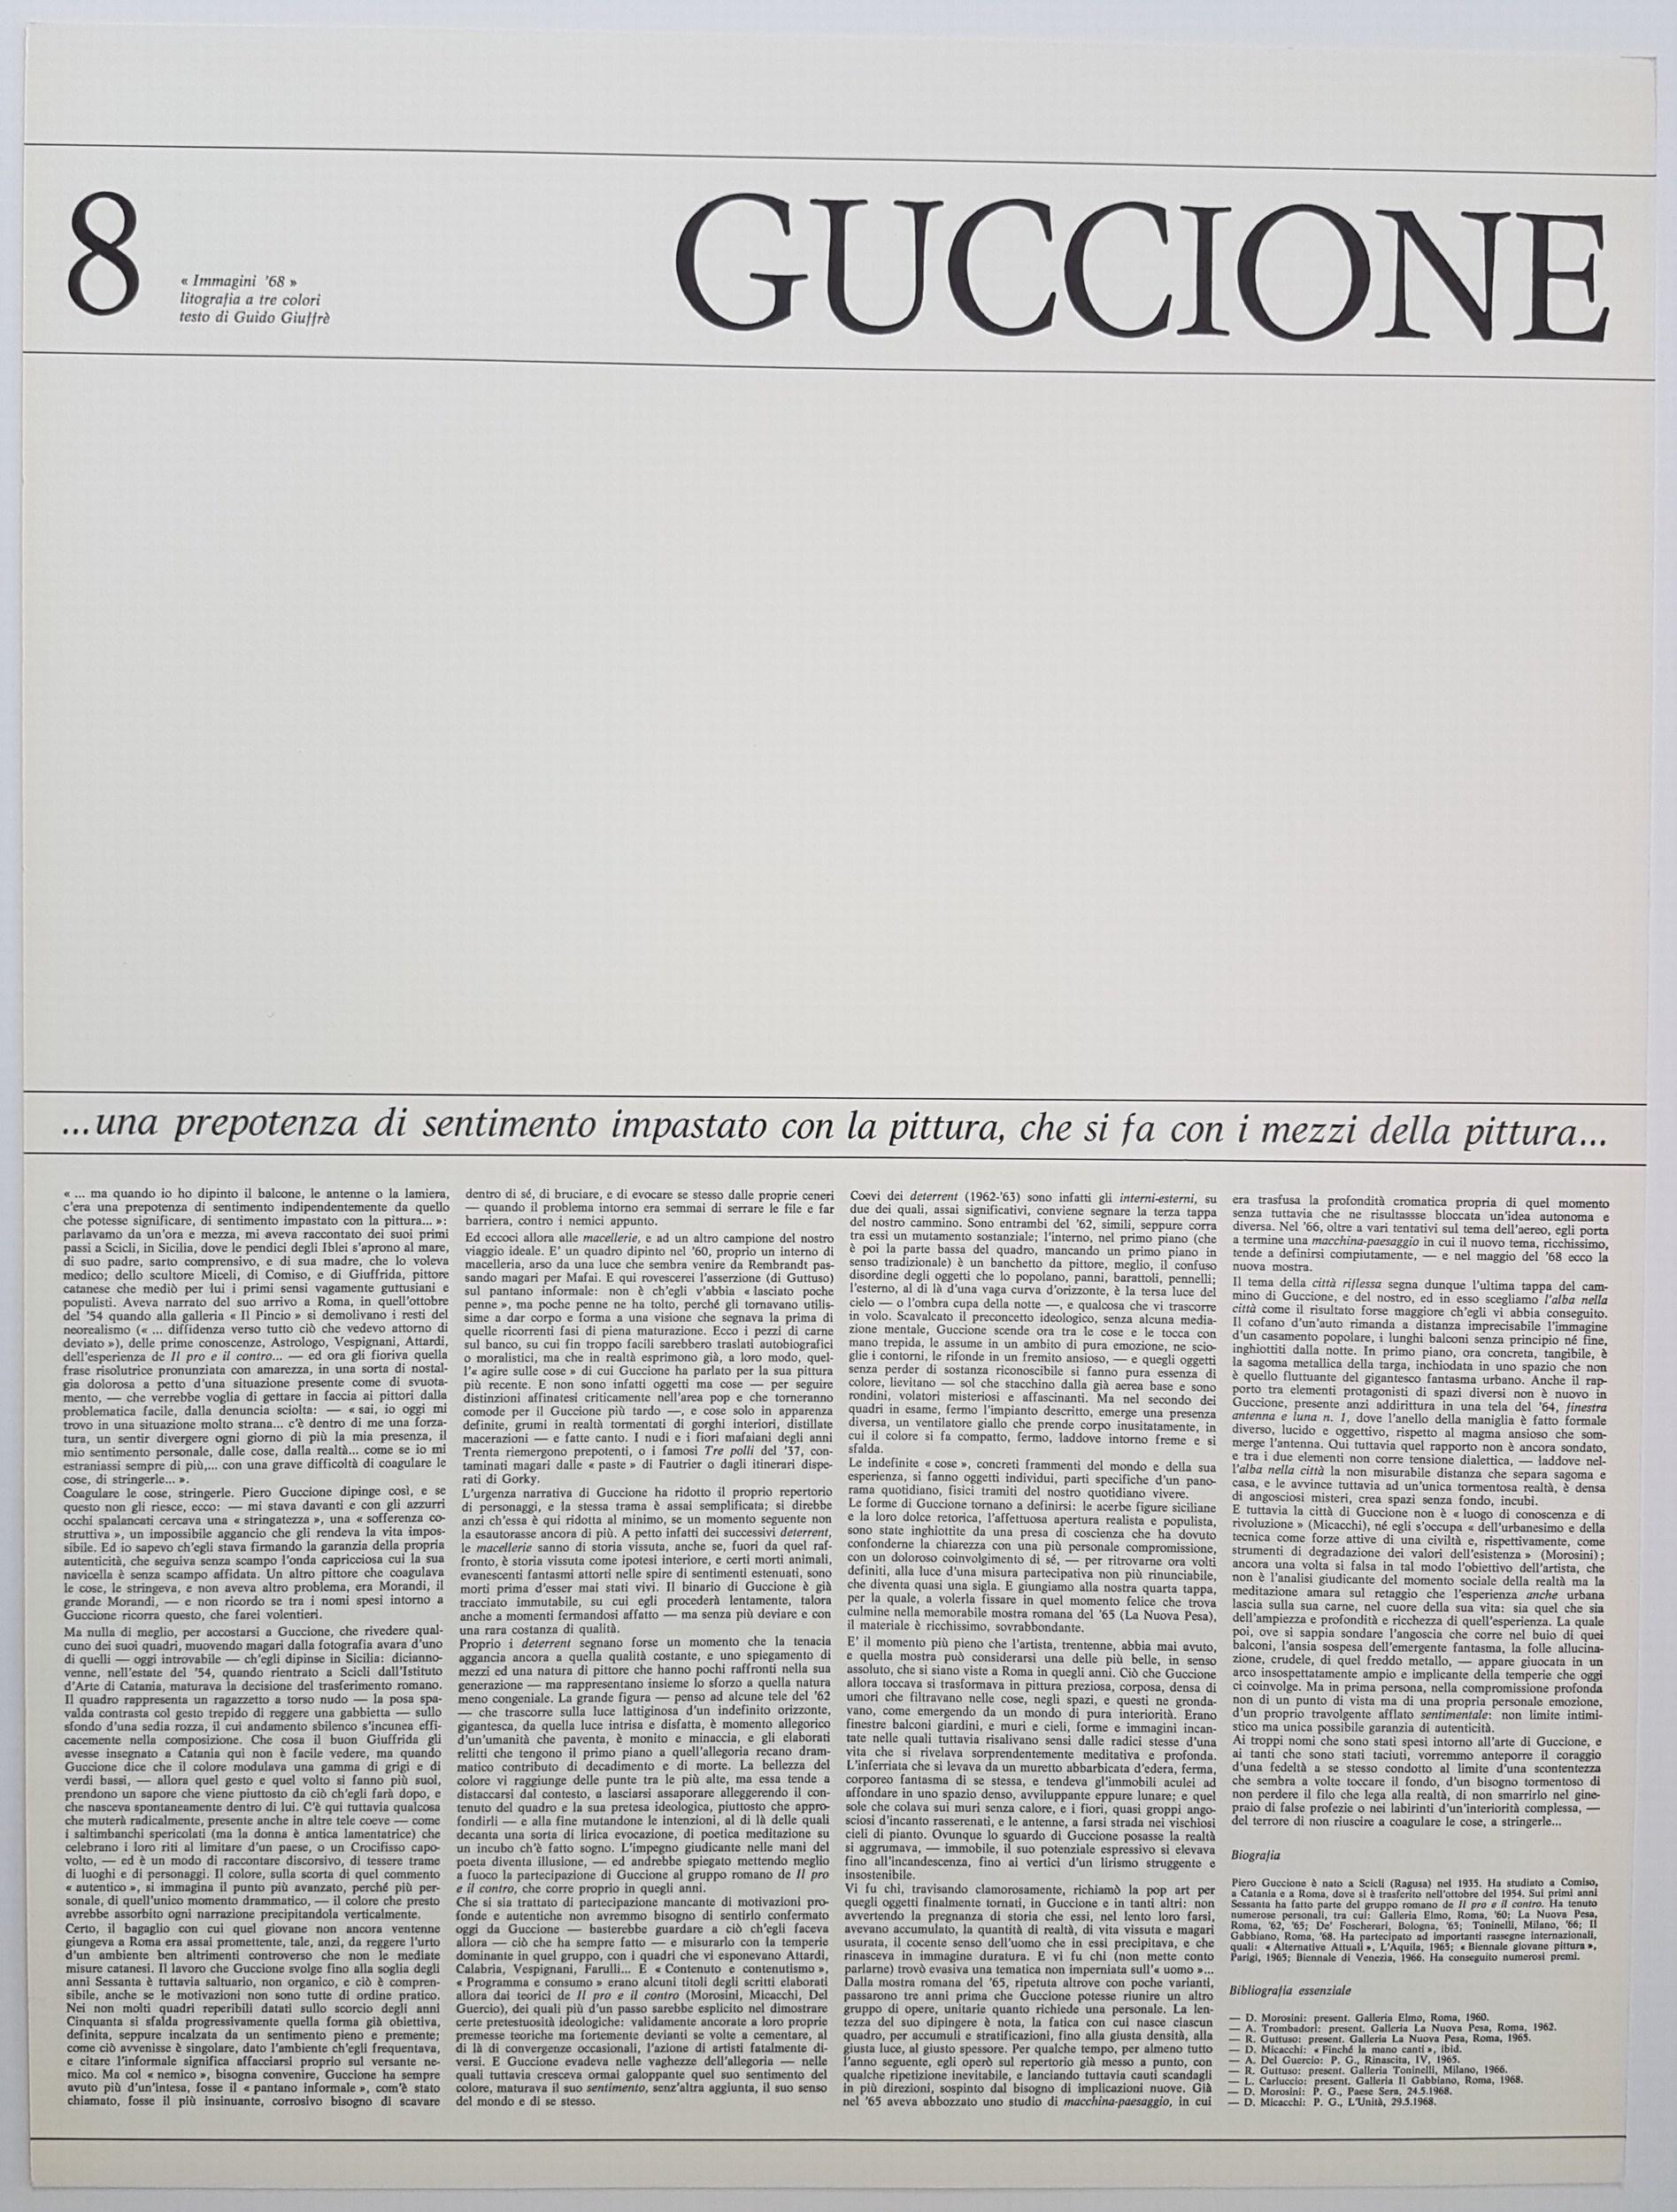 Images - Modern Print by PIERO GUCCIONE